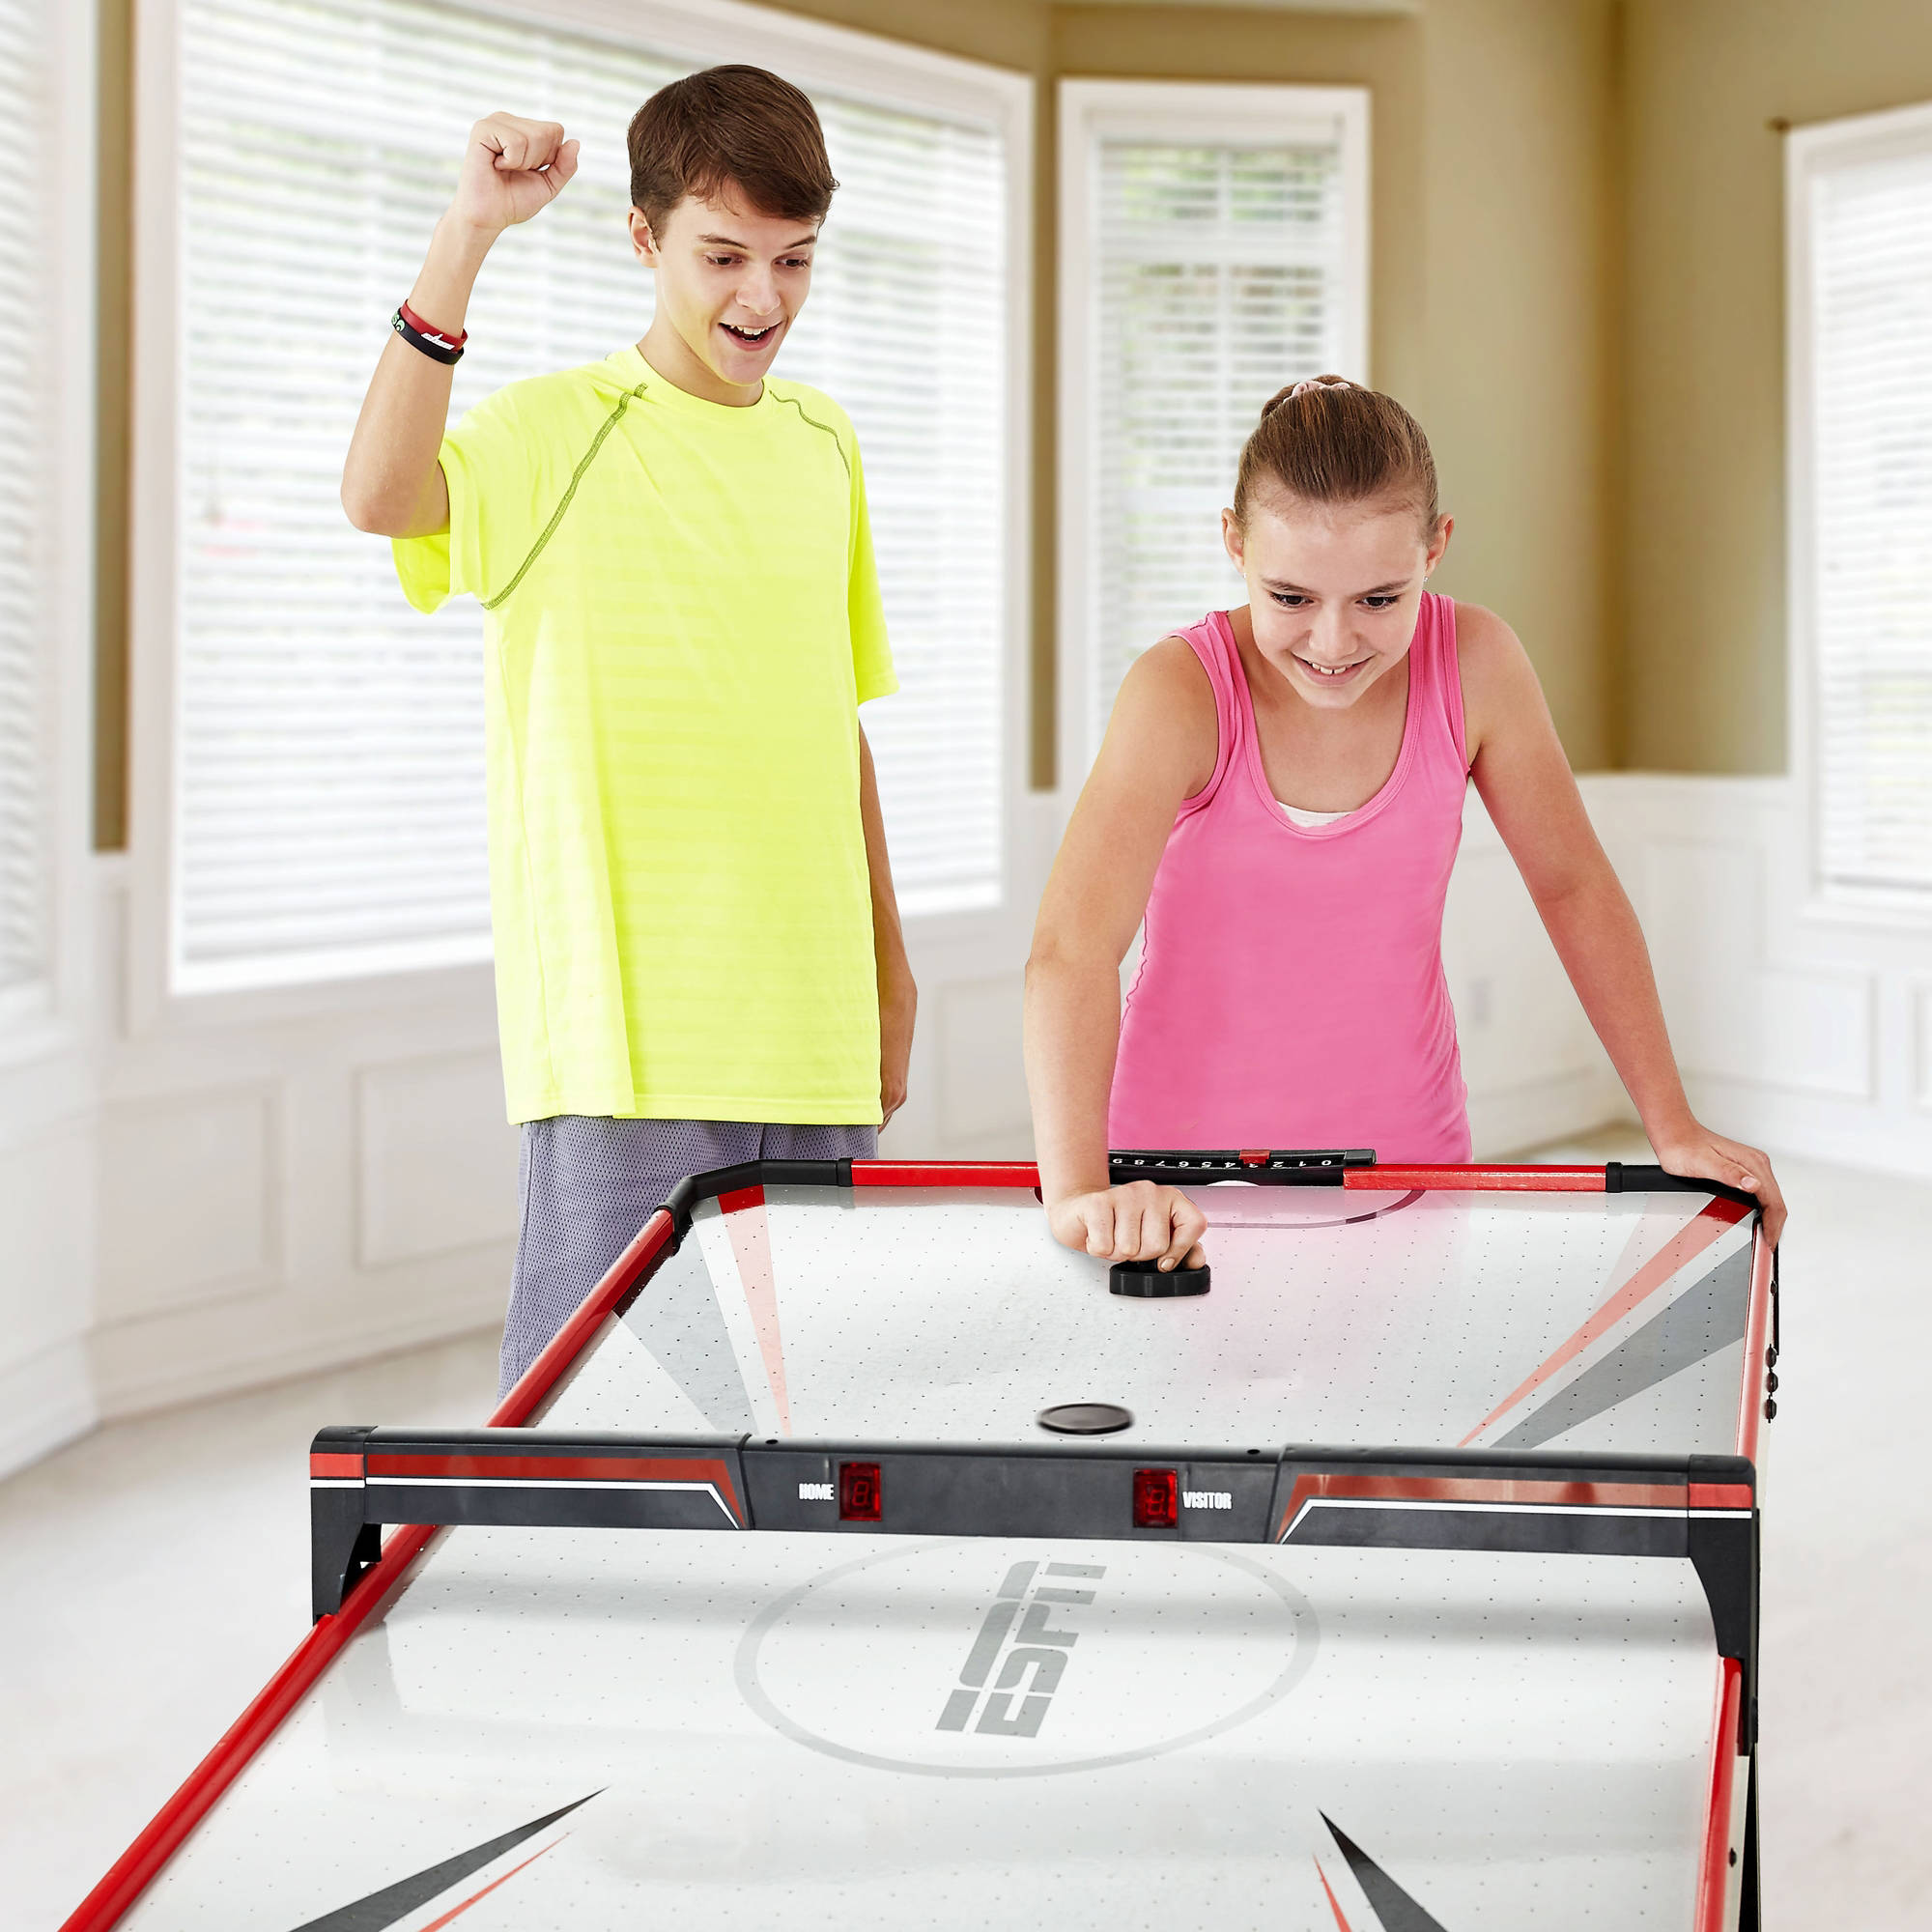 ESPN 60" Air Powered Hockey Table with Overhead Electronic Scorer, Accessories Included, Black/Red - image 3 of 8